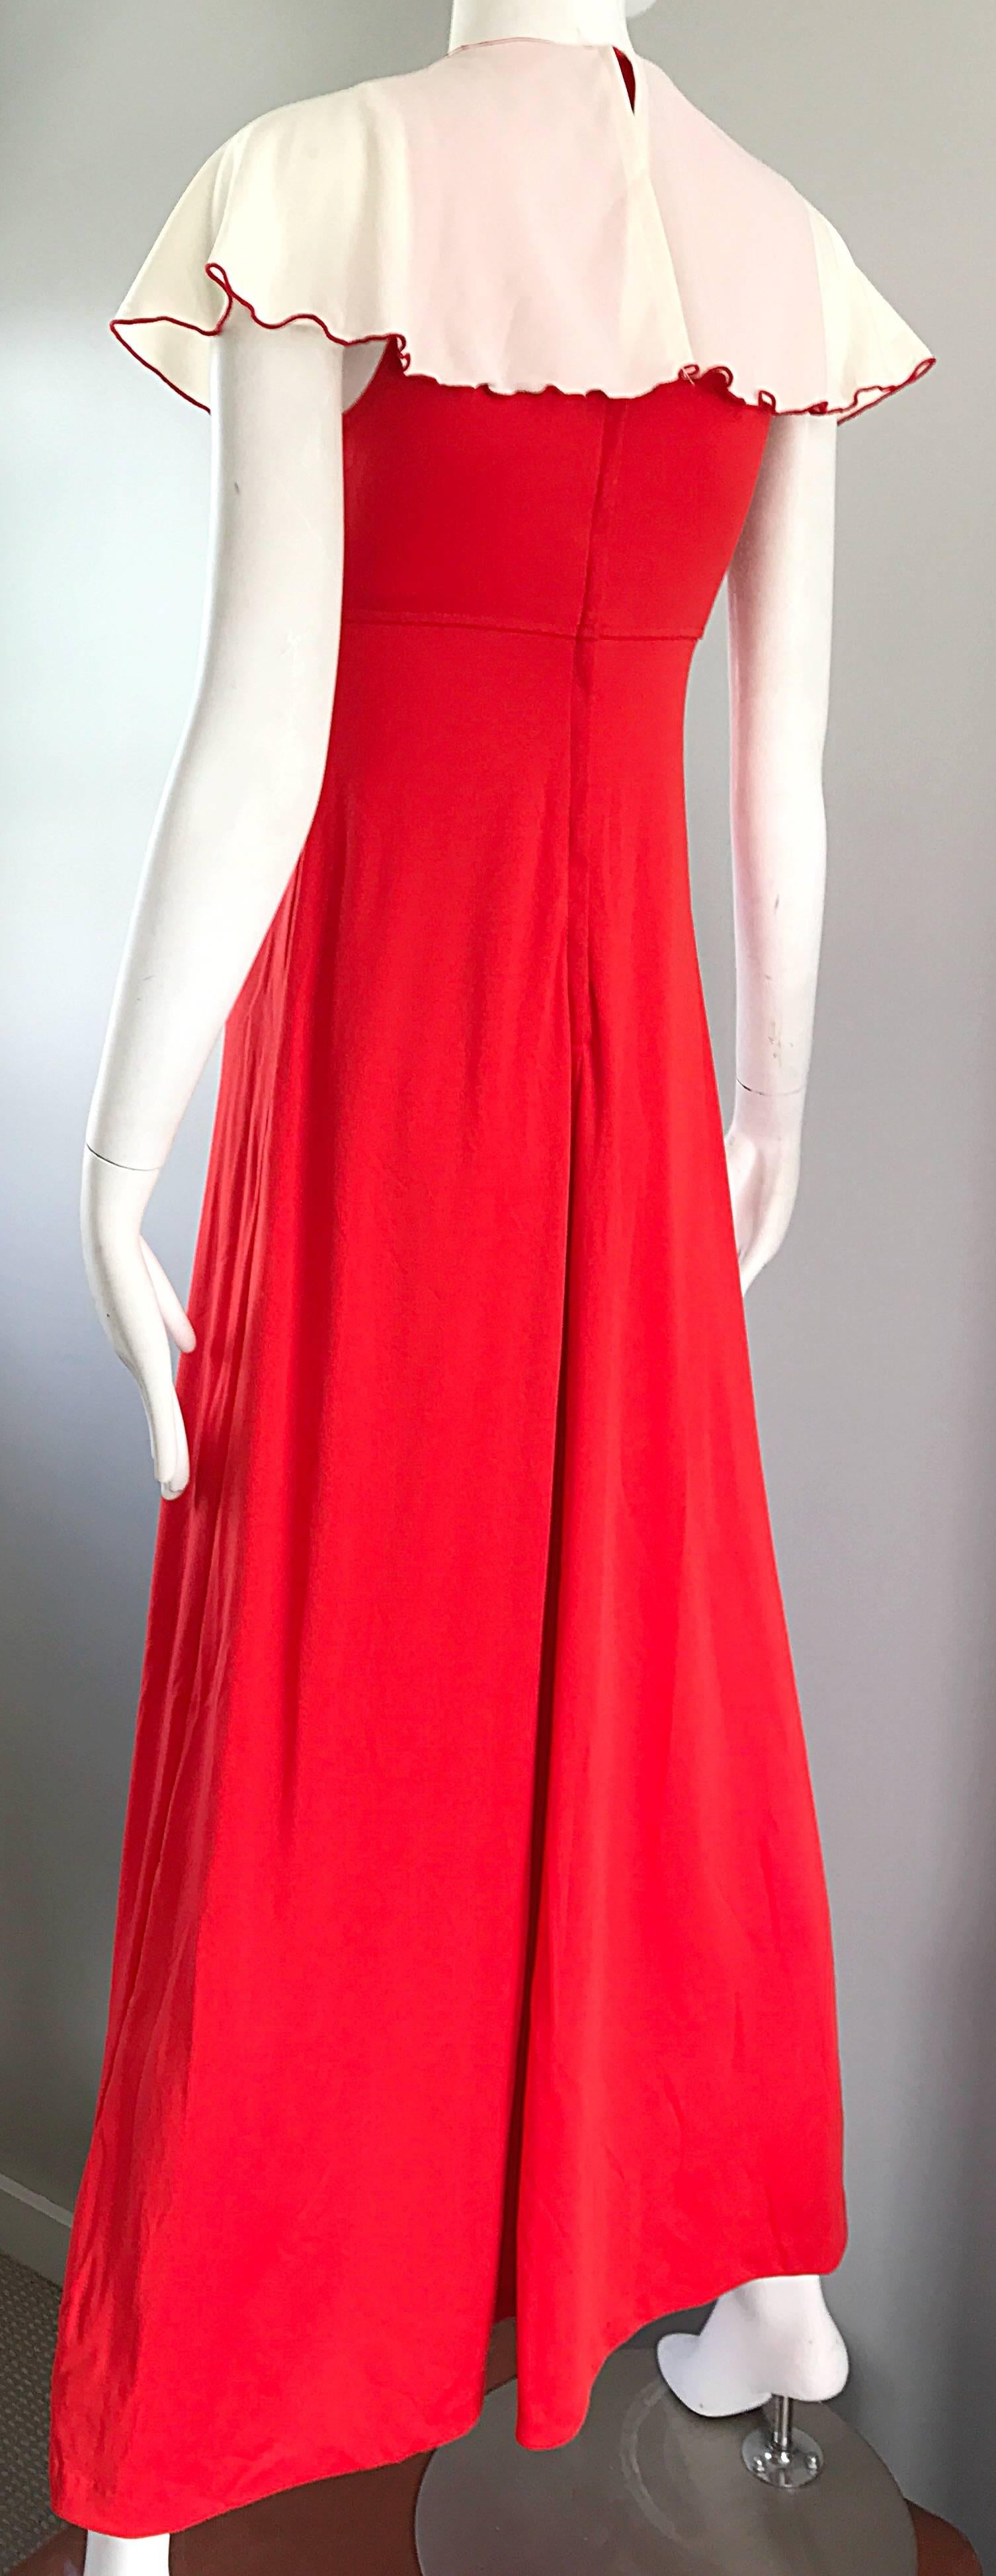 Giorgio di Sant Angelo 1970s Orange White Keyhole Vintage 70s Boho Maxi Dress In Excellent Condition For Sale In San Diego, CA